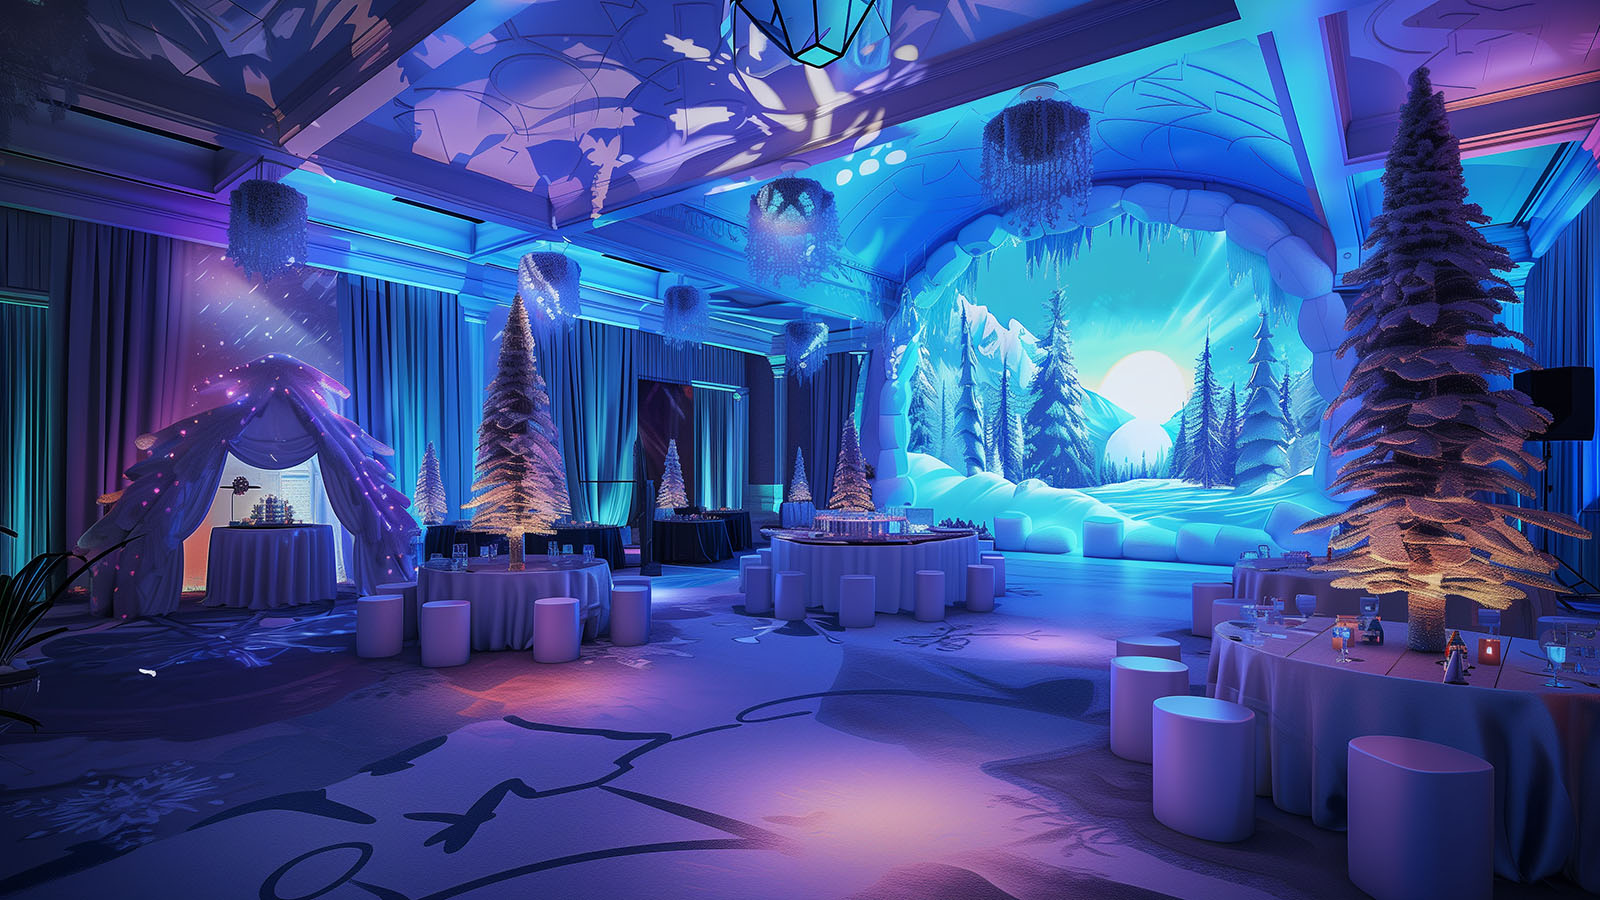 Throwing a Memorable Winter Party